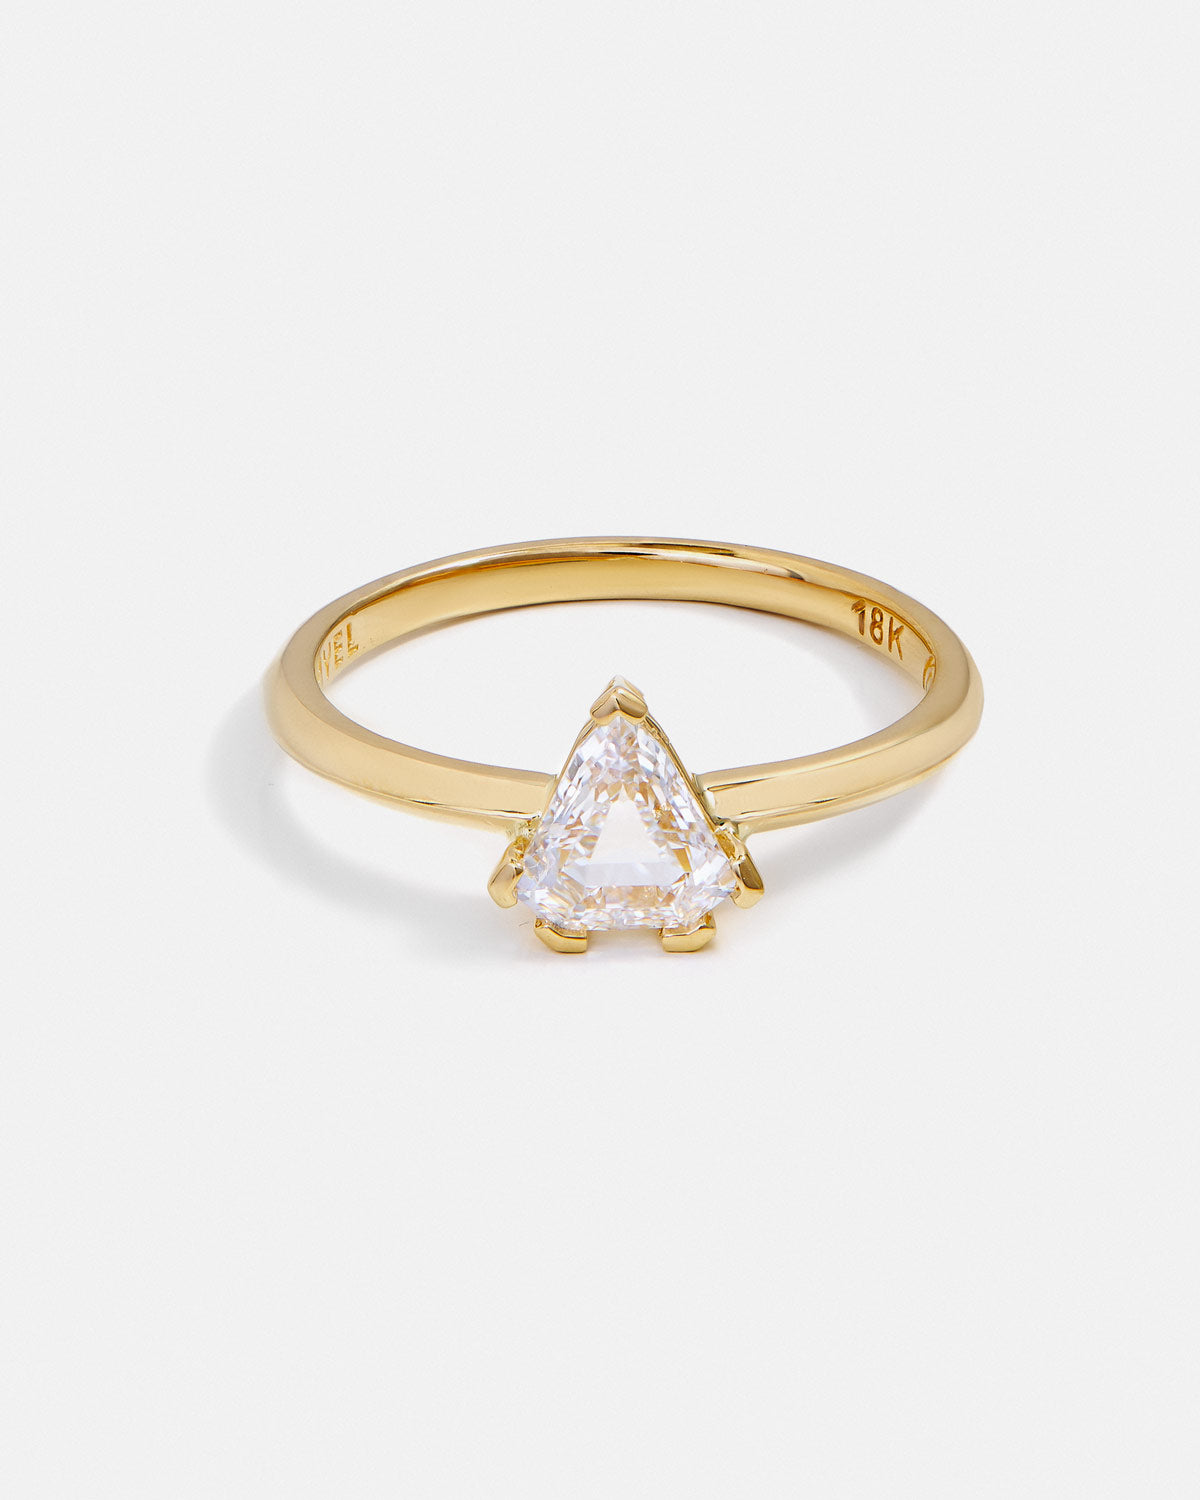 Shield Ring in 18k Fairmined Yellow Gold with 0.70ct Canadian Diamond